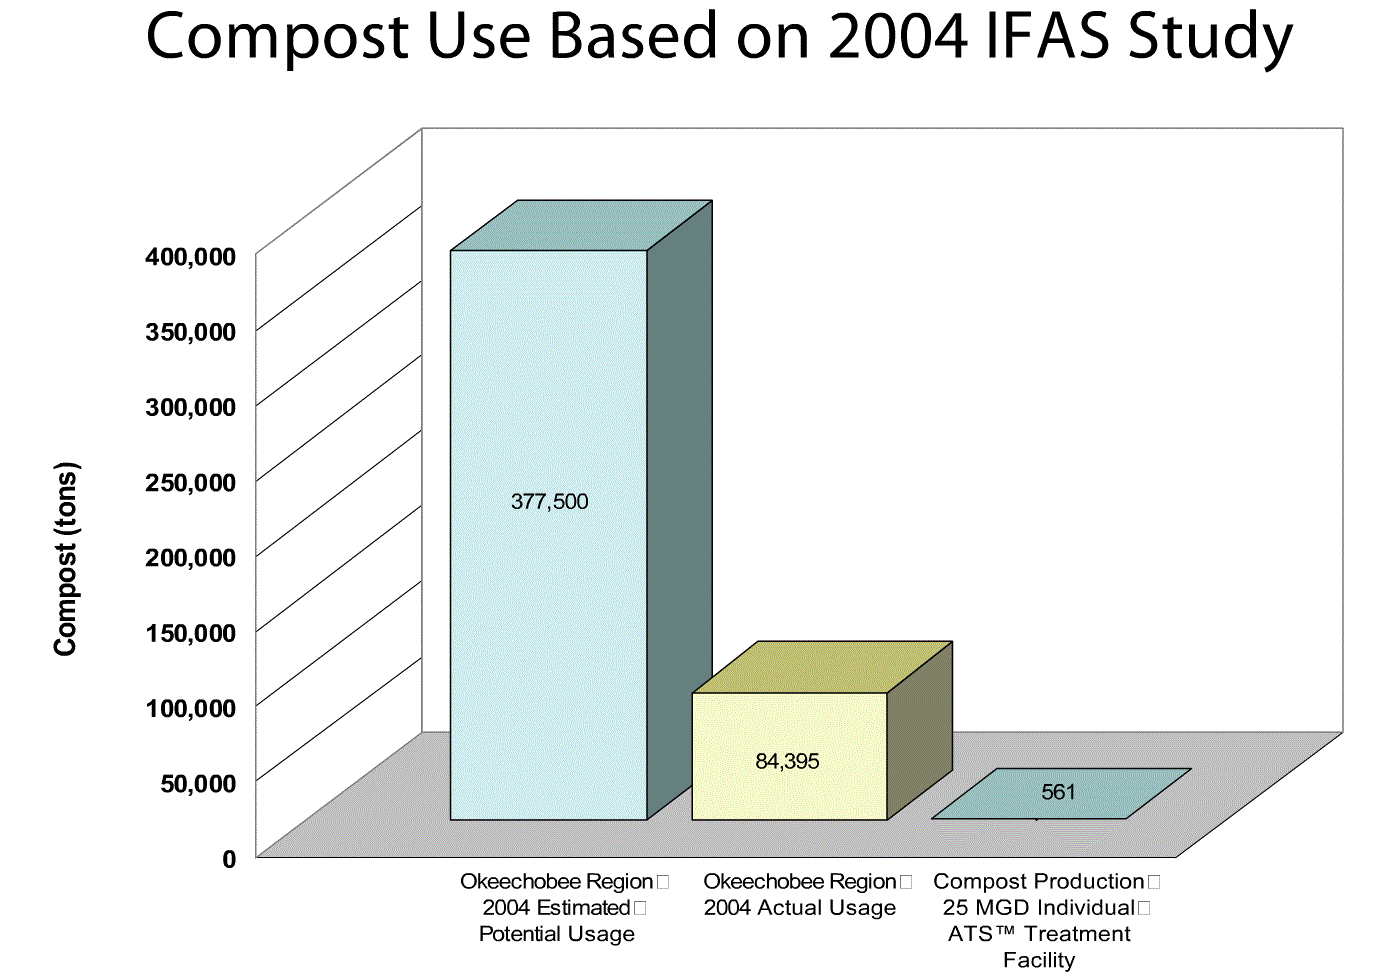 Source: Slivka, D., T.A. McClure, A.R. Buhr and R. Albrecht. 1992. Compost: United States Supply and Demand Potential. Biomass and Bioenergy, 3 (3-4): 281-299; Shiralipour, A., E. Epstein,. 2005. Preliminary Compost Market Assessment  Okeechobee Region, Florida